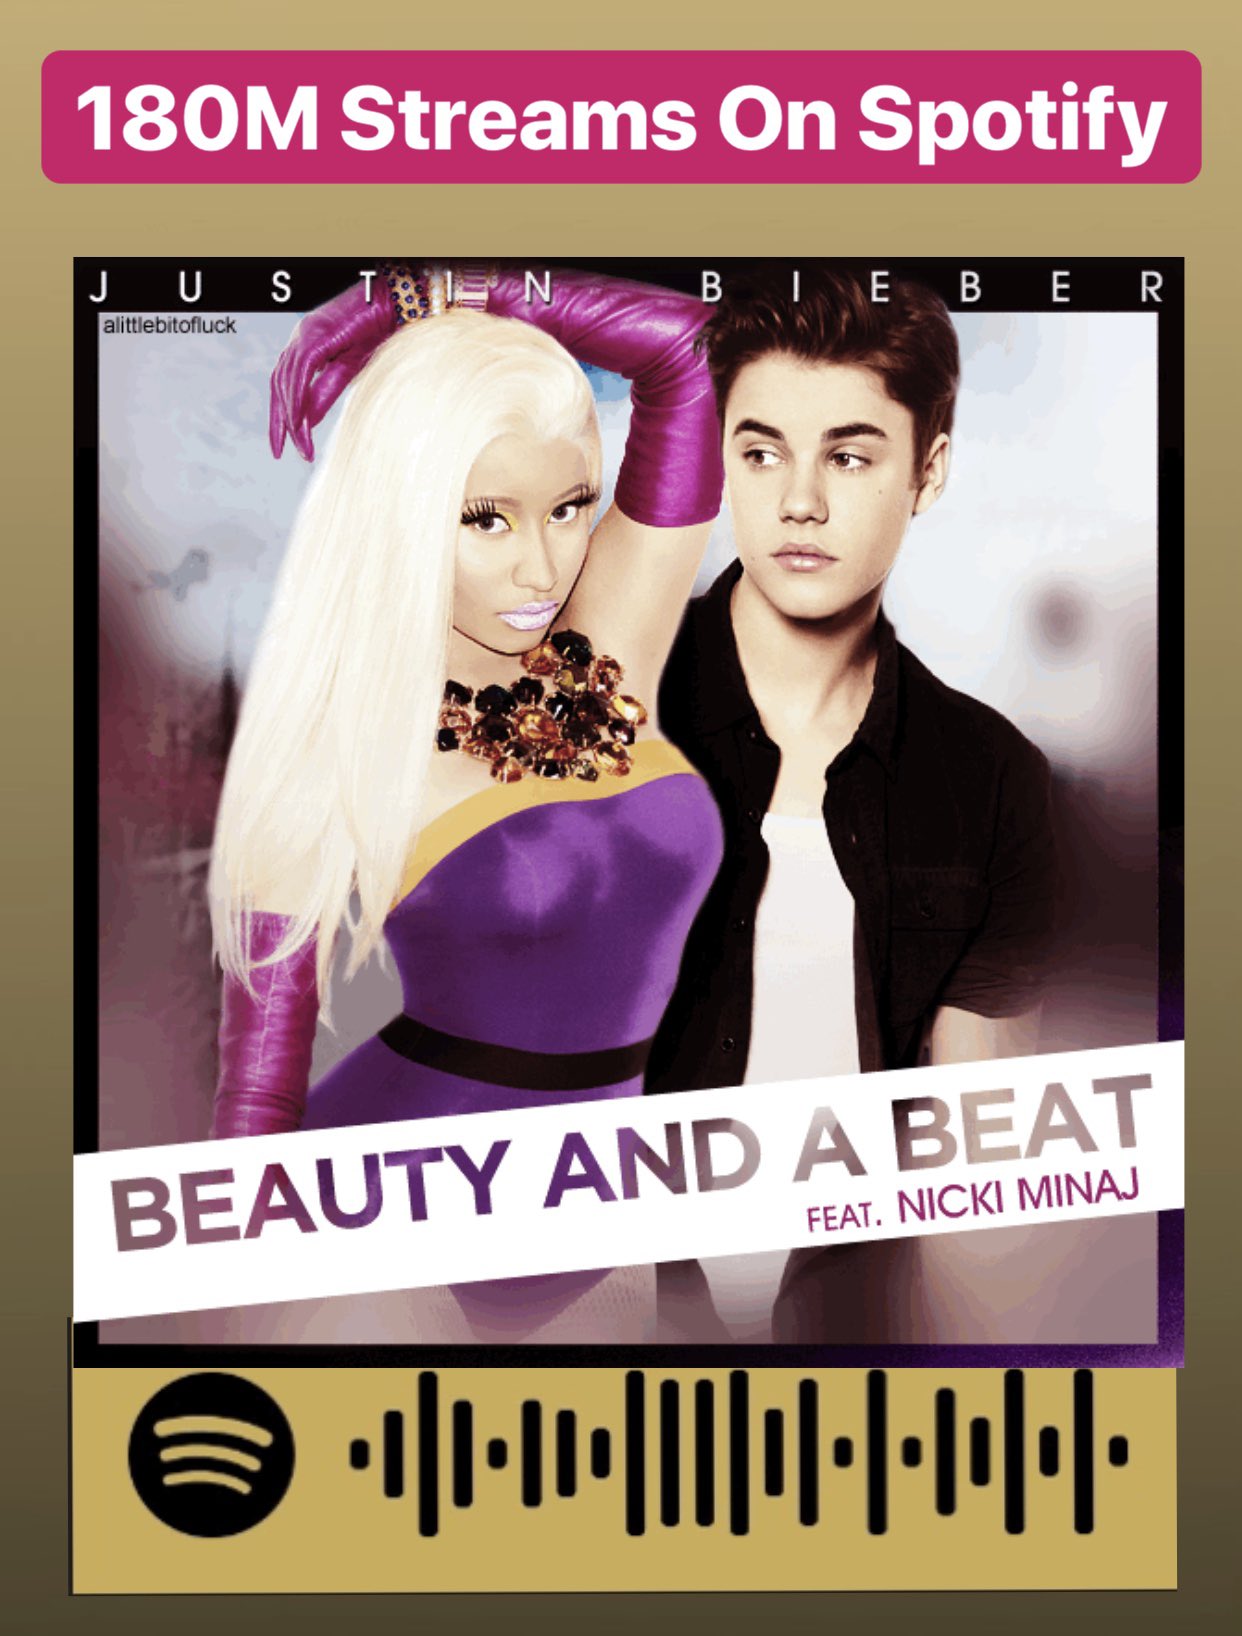 Justin Bieber Crew On Twitter Beauty And A Beat By Justin Bieber Featuring Nicki Minaj Has